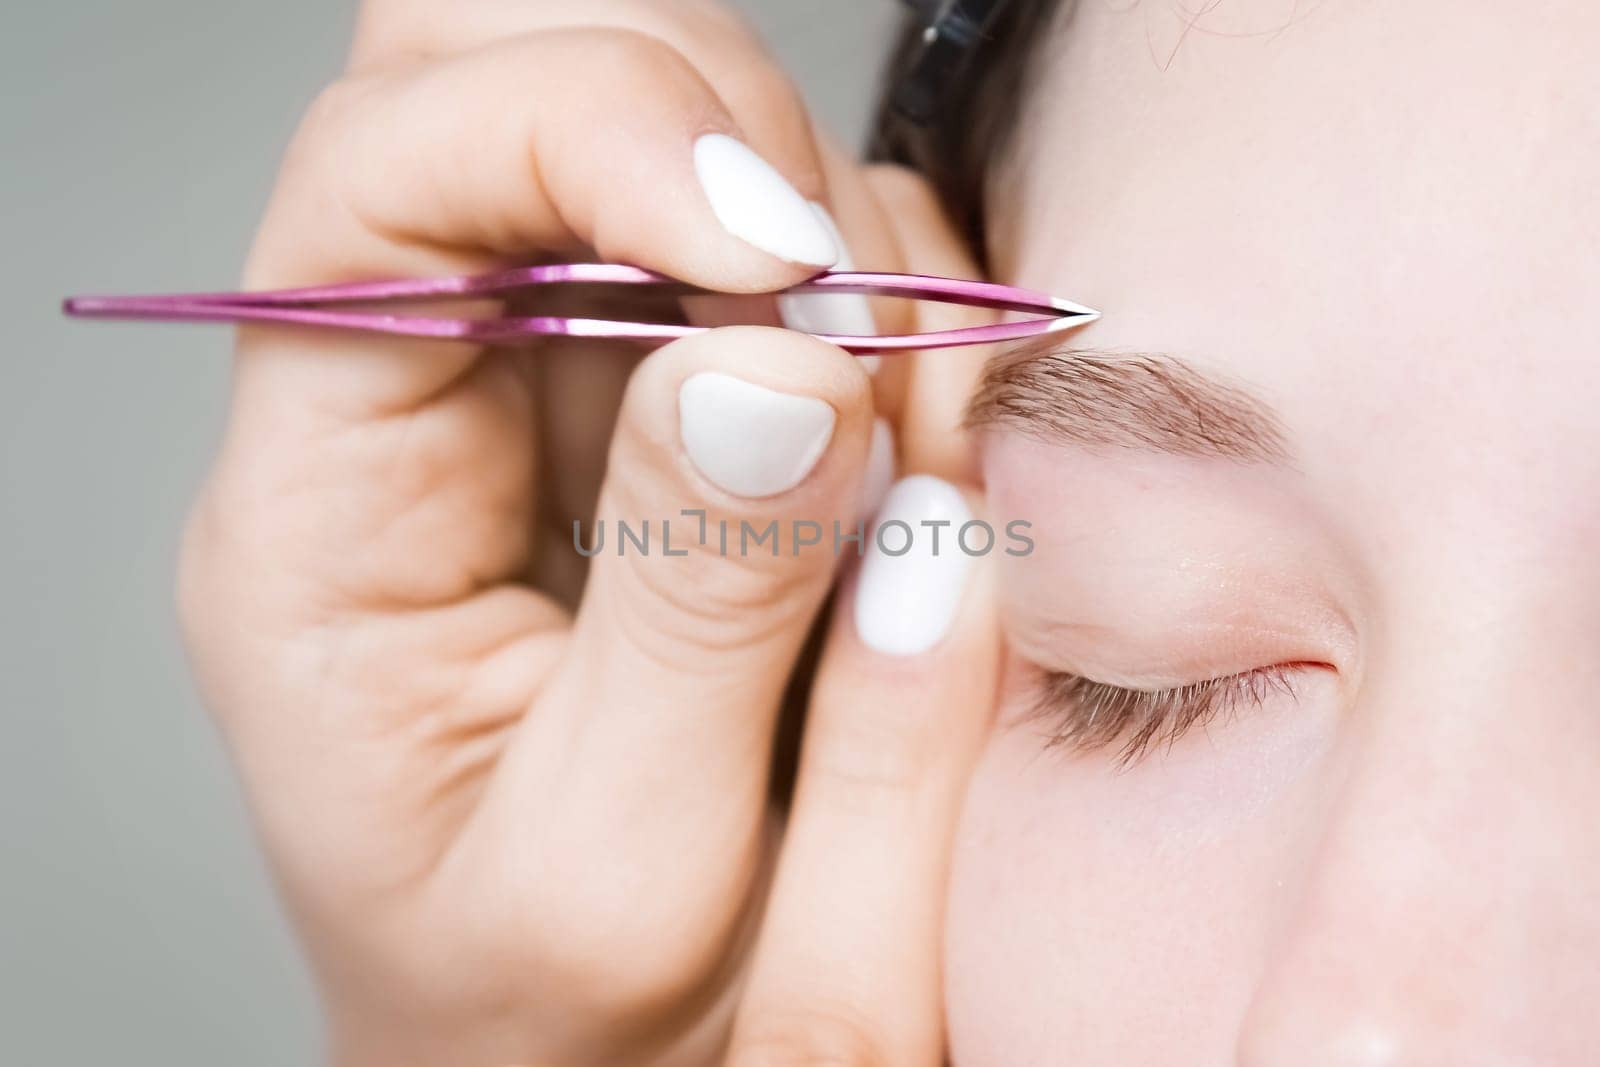 Make-up artist plucks the eyebrows of a woman without makeup with tweezers. Beautiful eyebrows close-up. Professional makeup and cosmetological skin care.